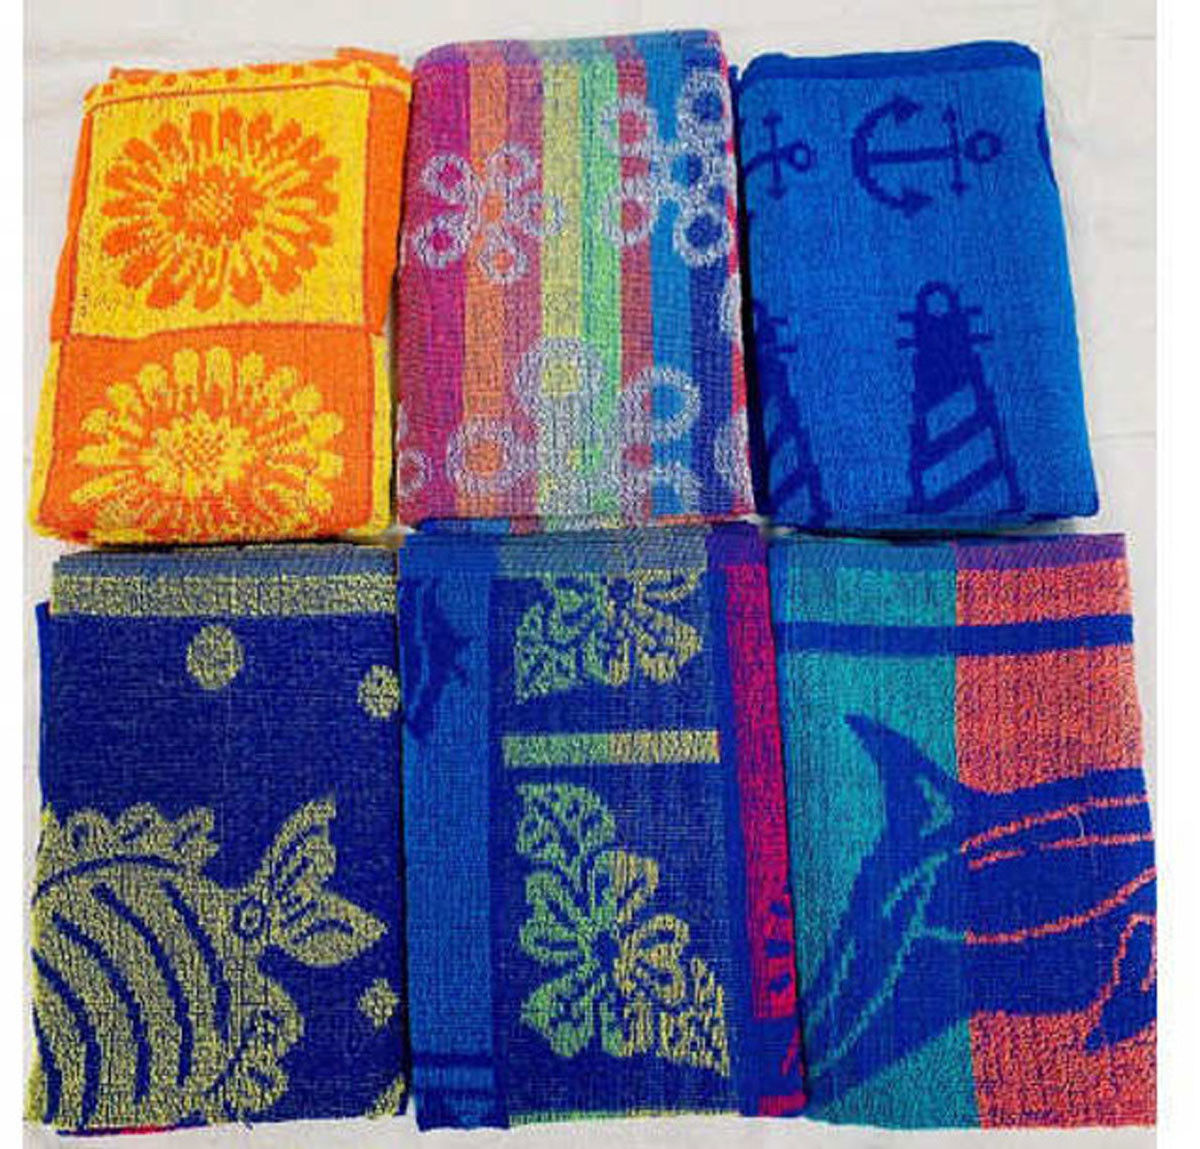 For what uses are the Economy Pool Towels, 6 Pack- Design Assortment suitable?